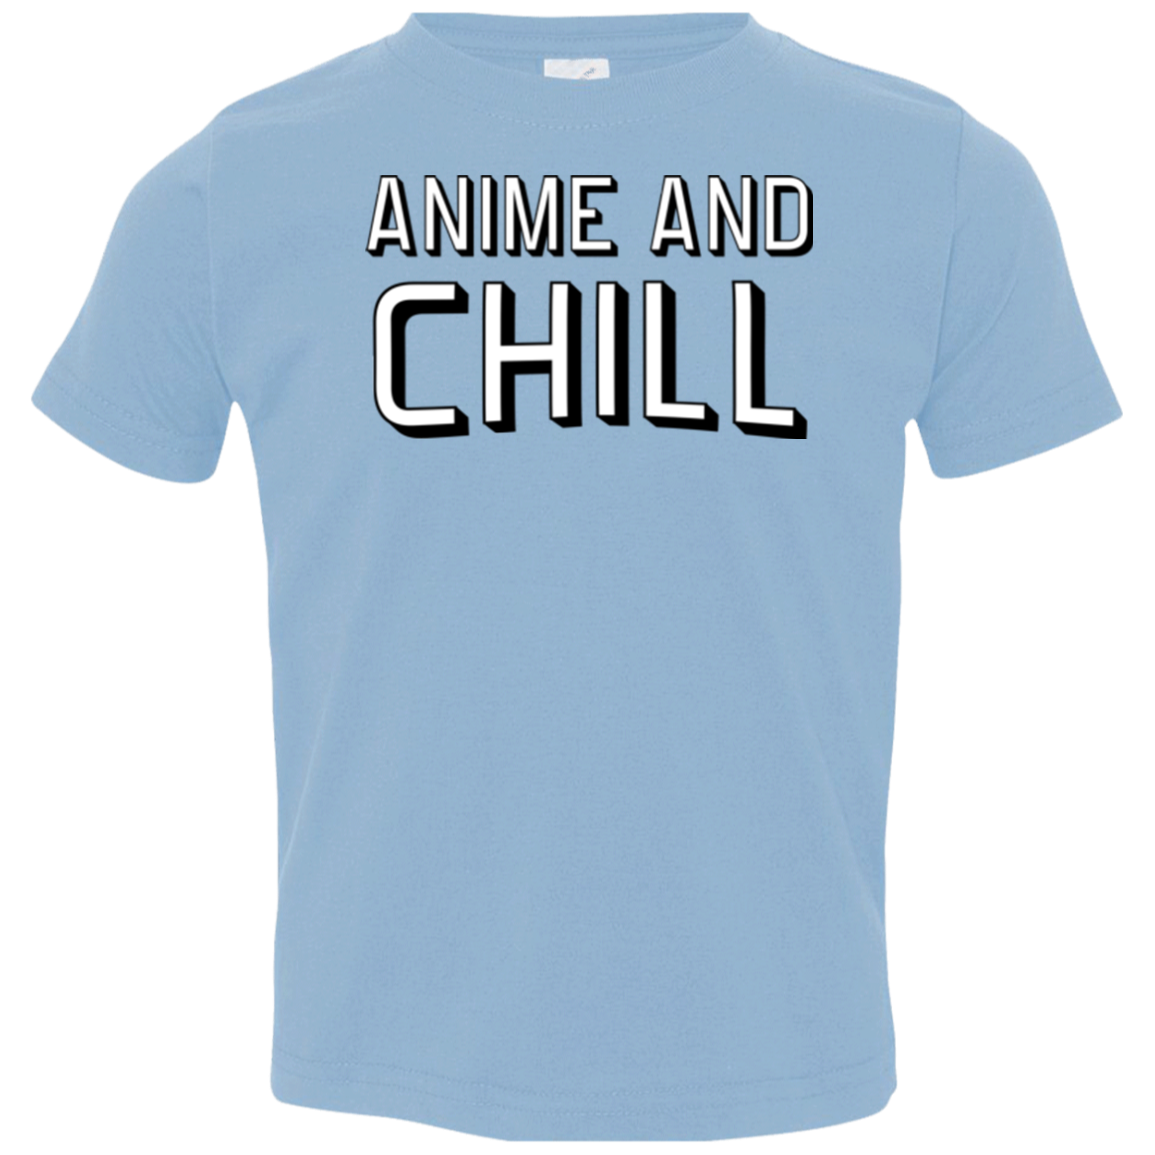 Anime and chill Toddler Premium T-Shirt